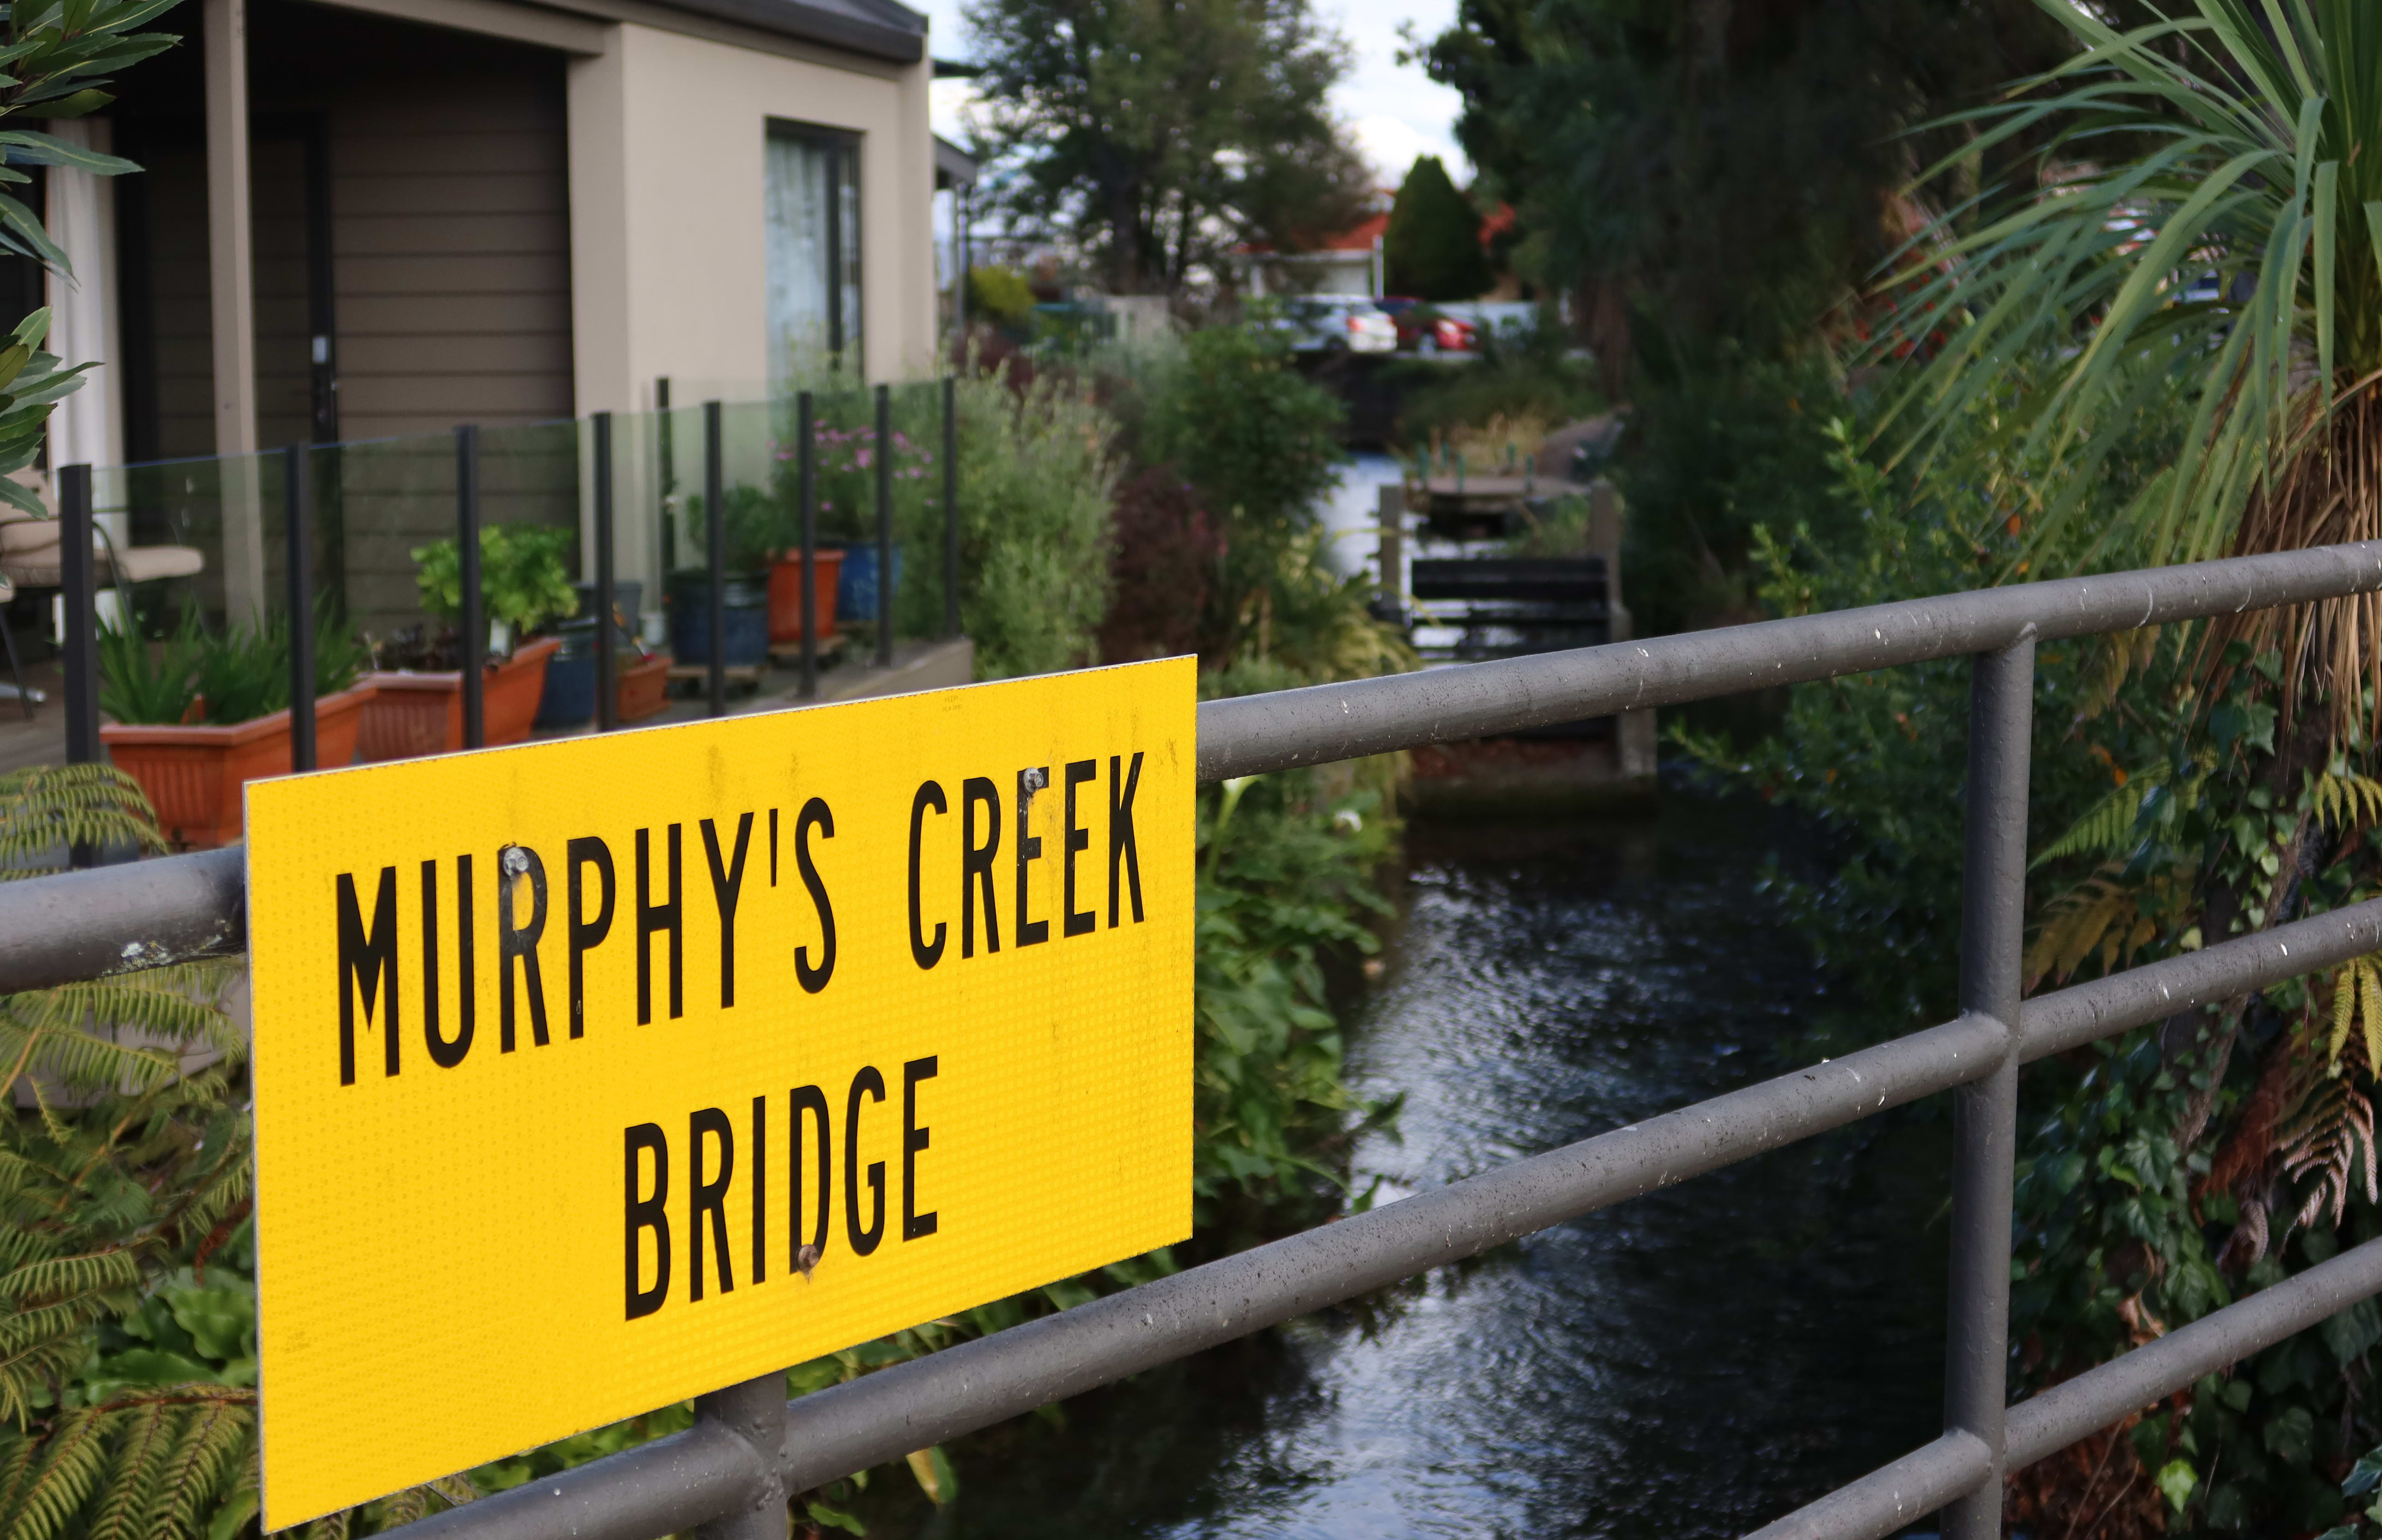 The council wants to put more stormwater into Murphy’s Creek.